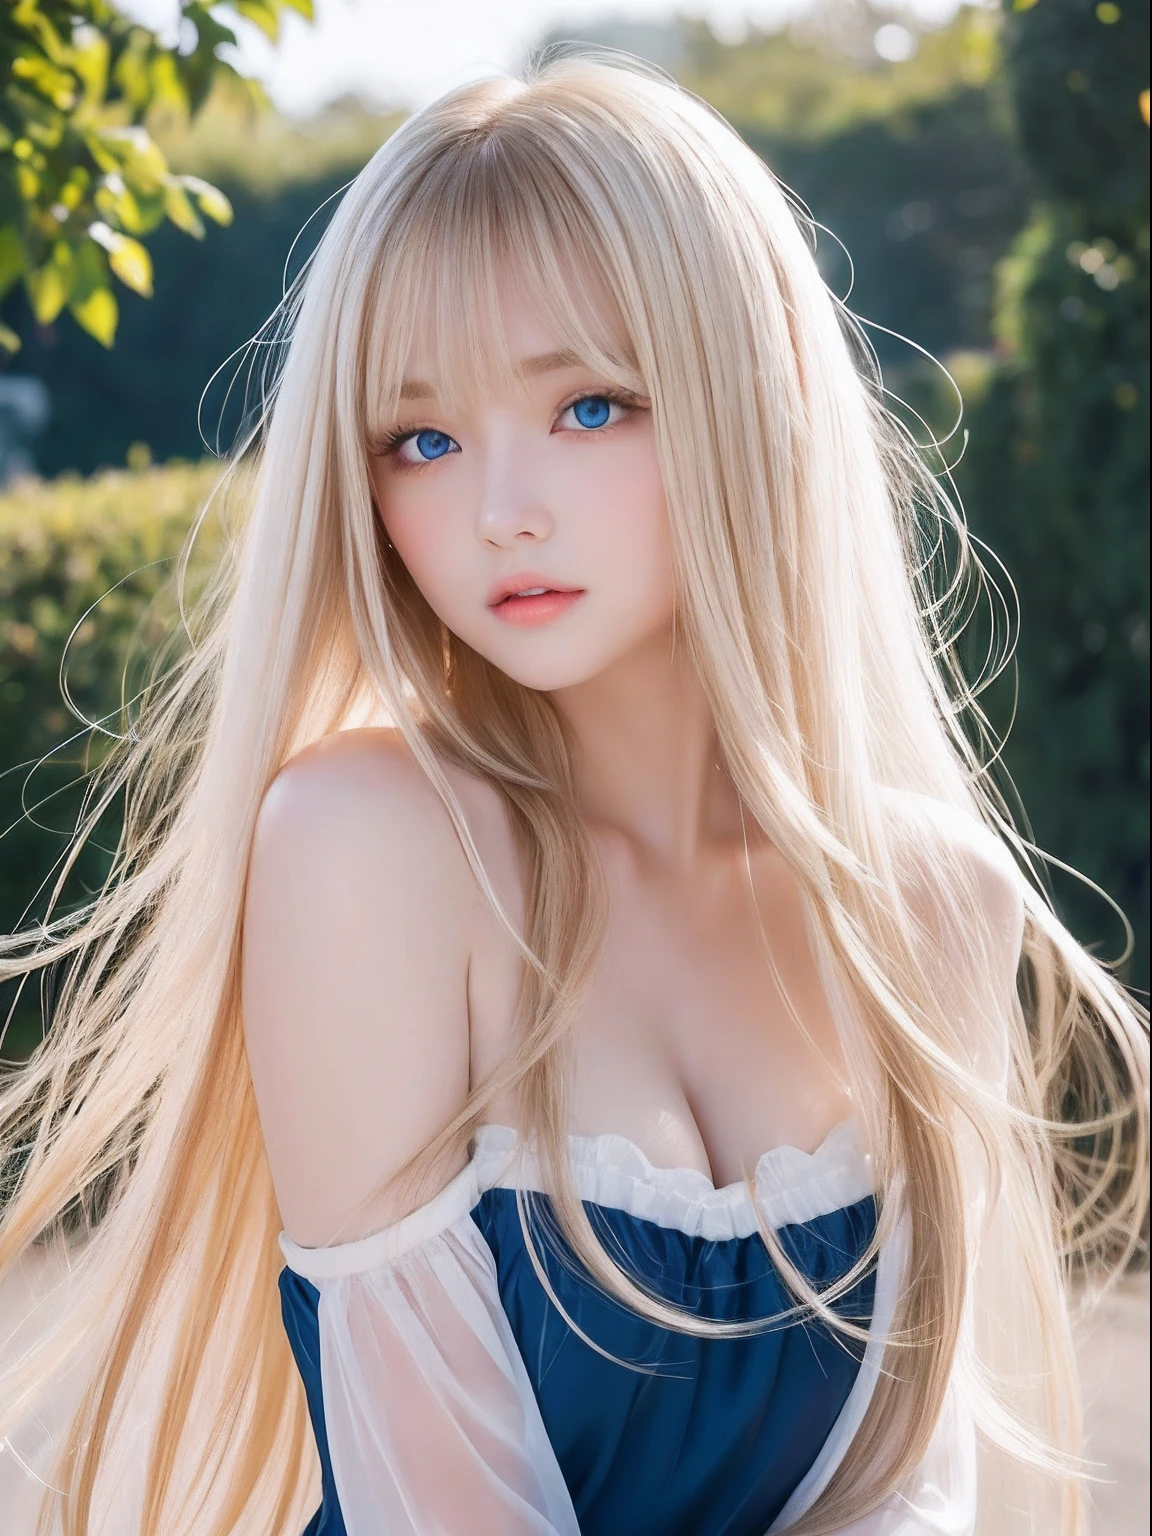 Transparent white glossy skin、Wind hair gets in the way in front of cute face、Colossal 、20 year old cute sexy little beautiful face、Beautiful straight hair that shines、Big, Shining light blue eyes、Long silky bangs covering cute eyes, Hair Hiding Sexy Face Super Long Hair Sexy Cute Young Woman Long Natural Blonde Glossy Light Hair